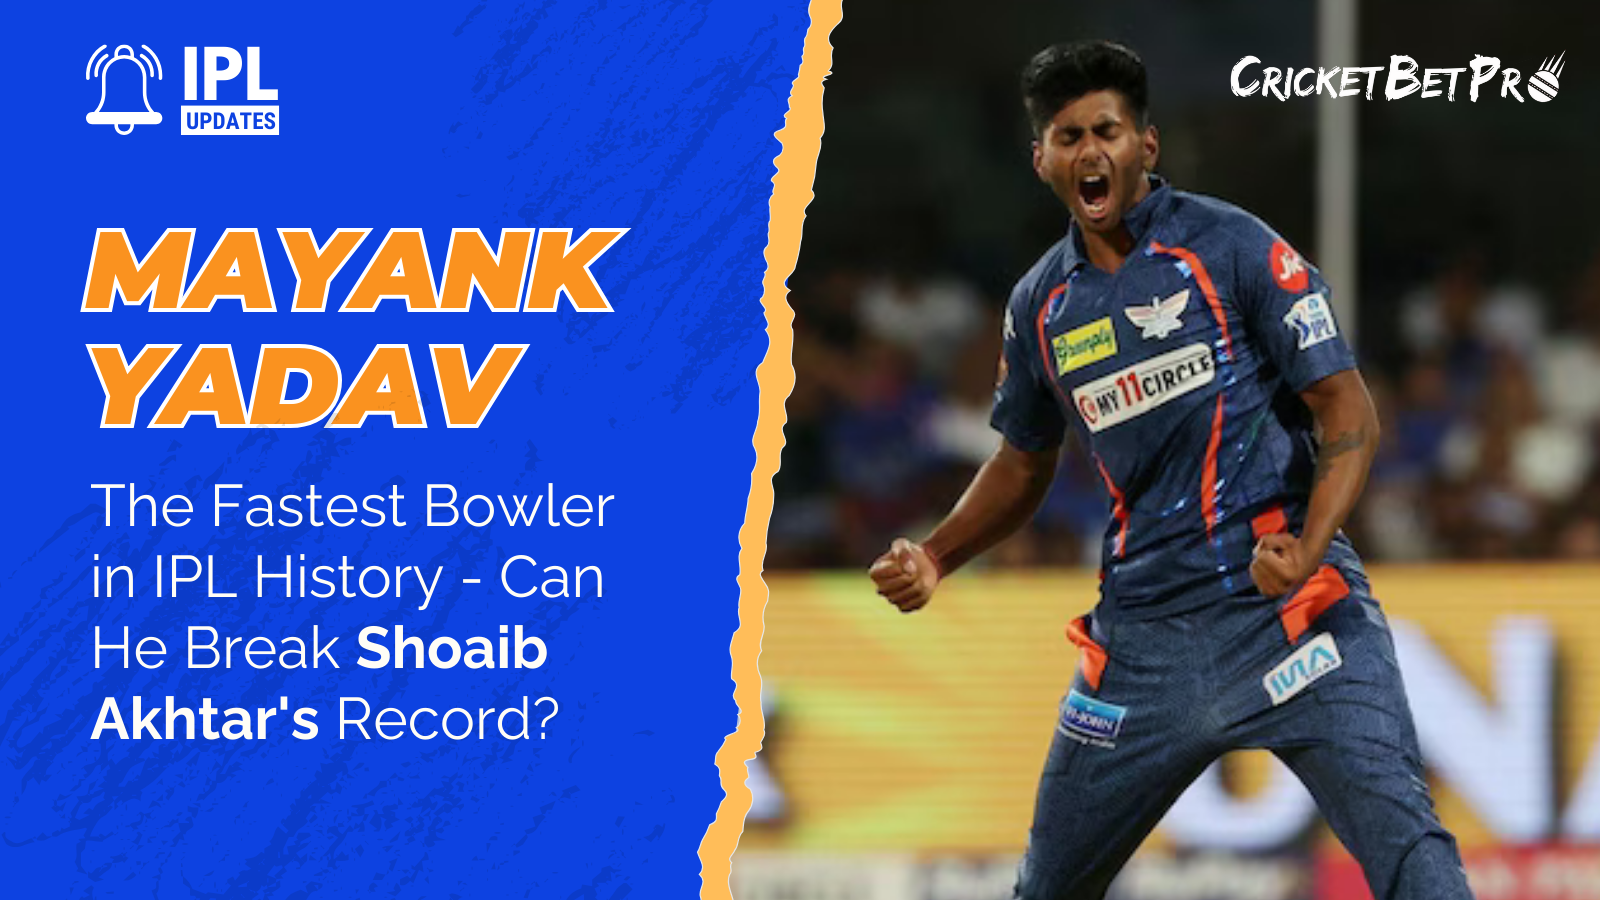 The Fastest Mayank Yadav Bowler in IPL History - Can He Break Shoaib Akhtar's Record (3)